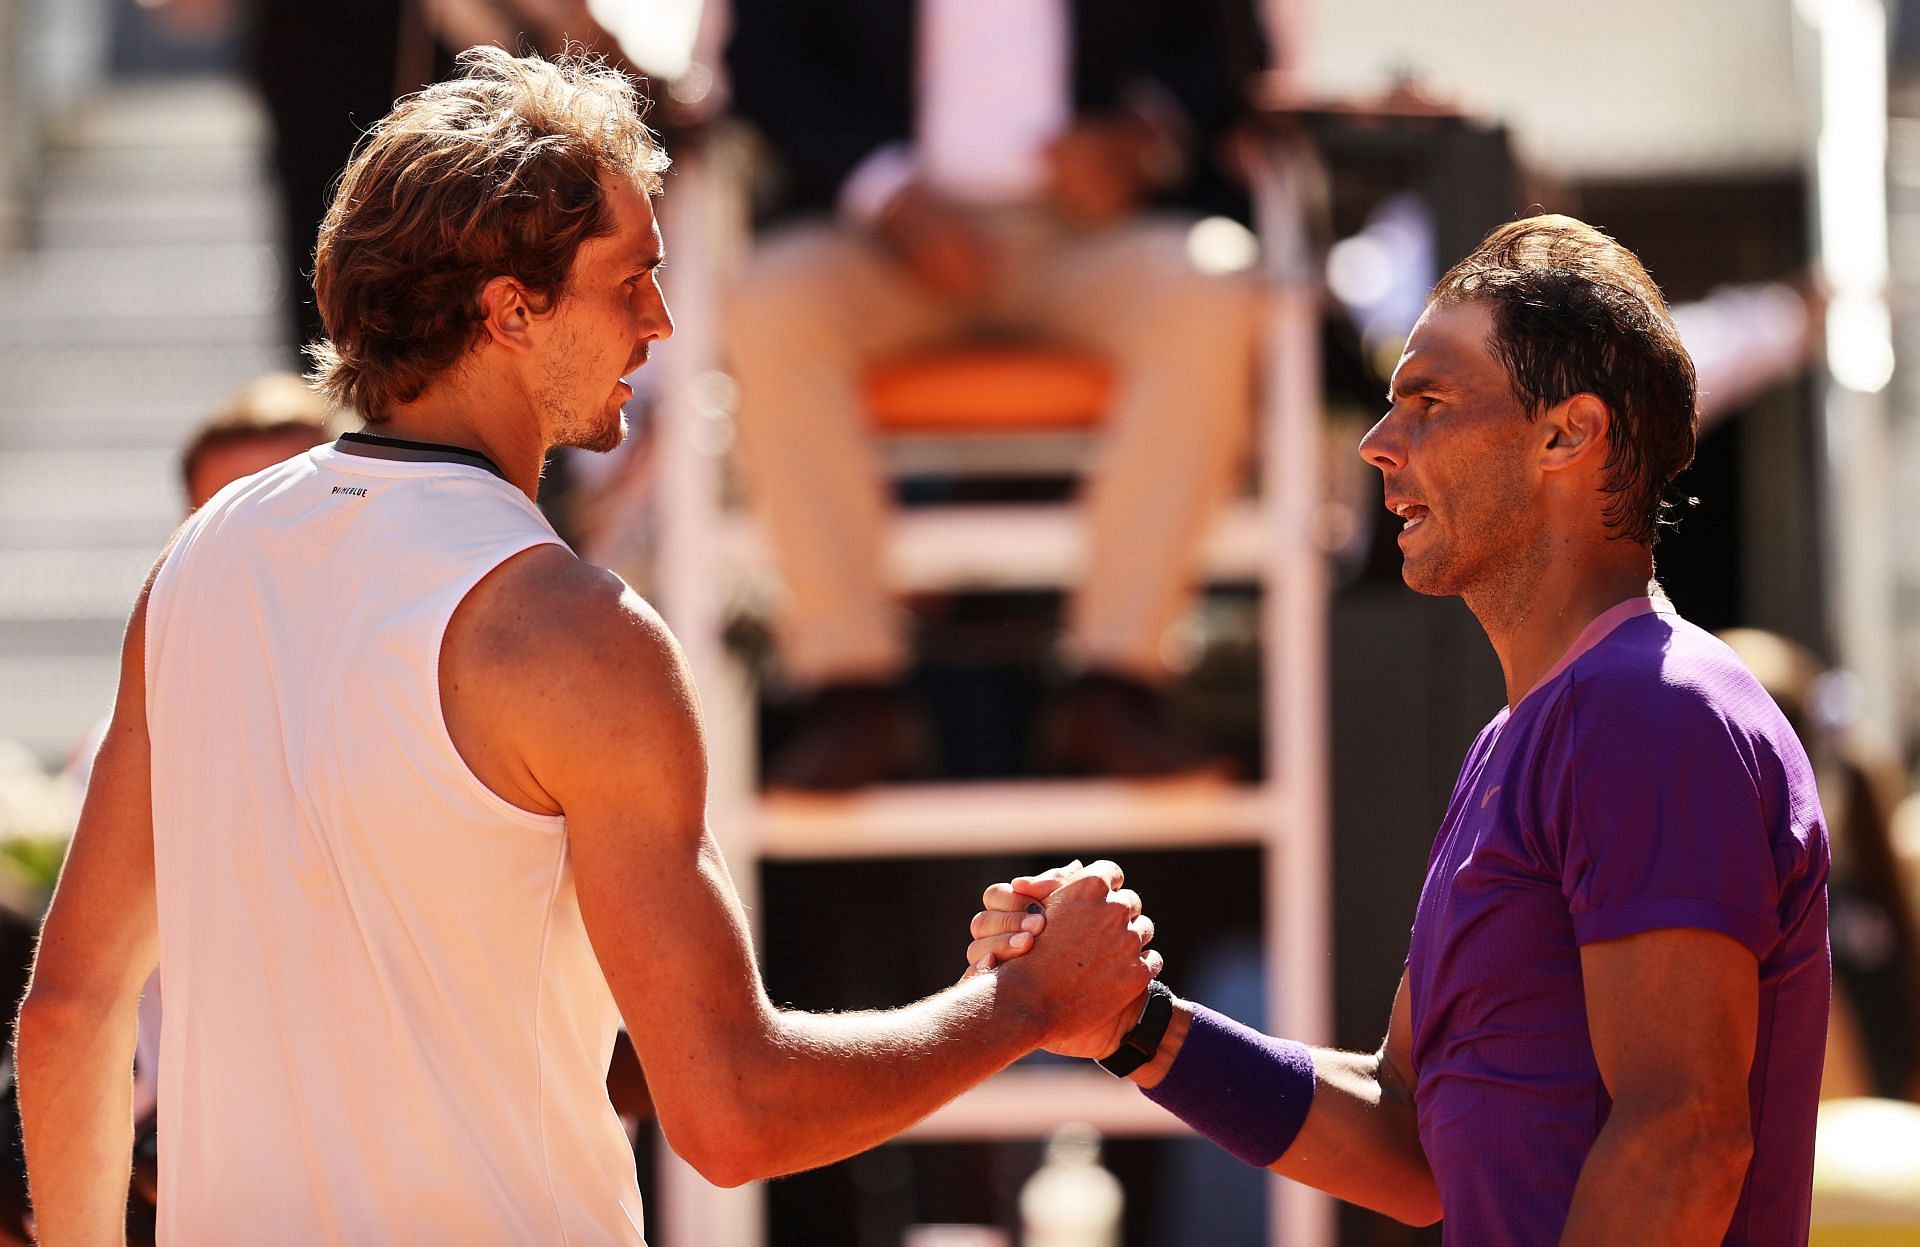 Rafael Nadal faces Alexander Zverev in the 2022 French Open semifinals.